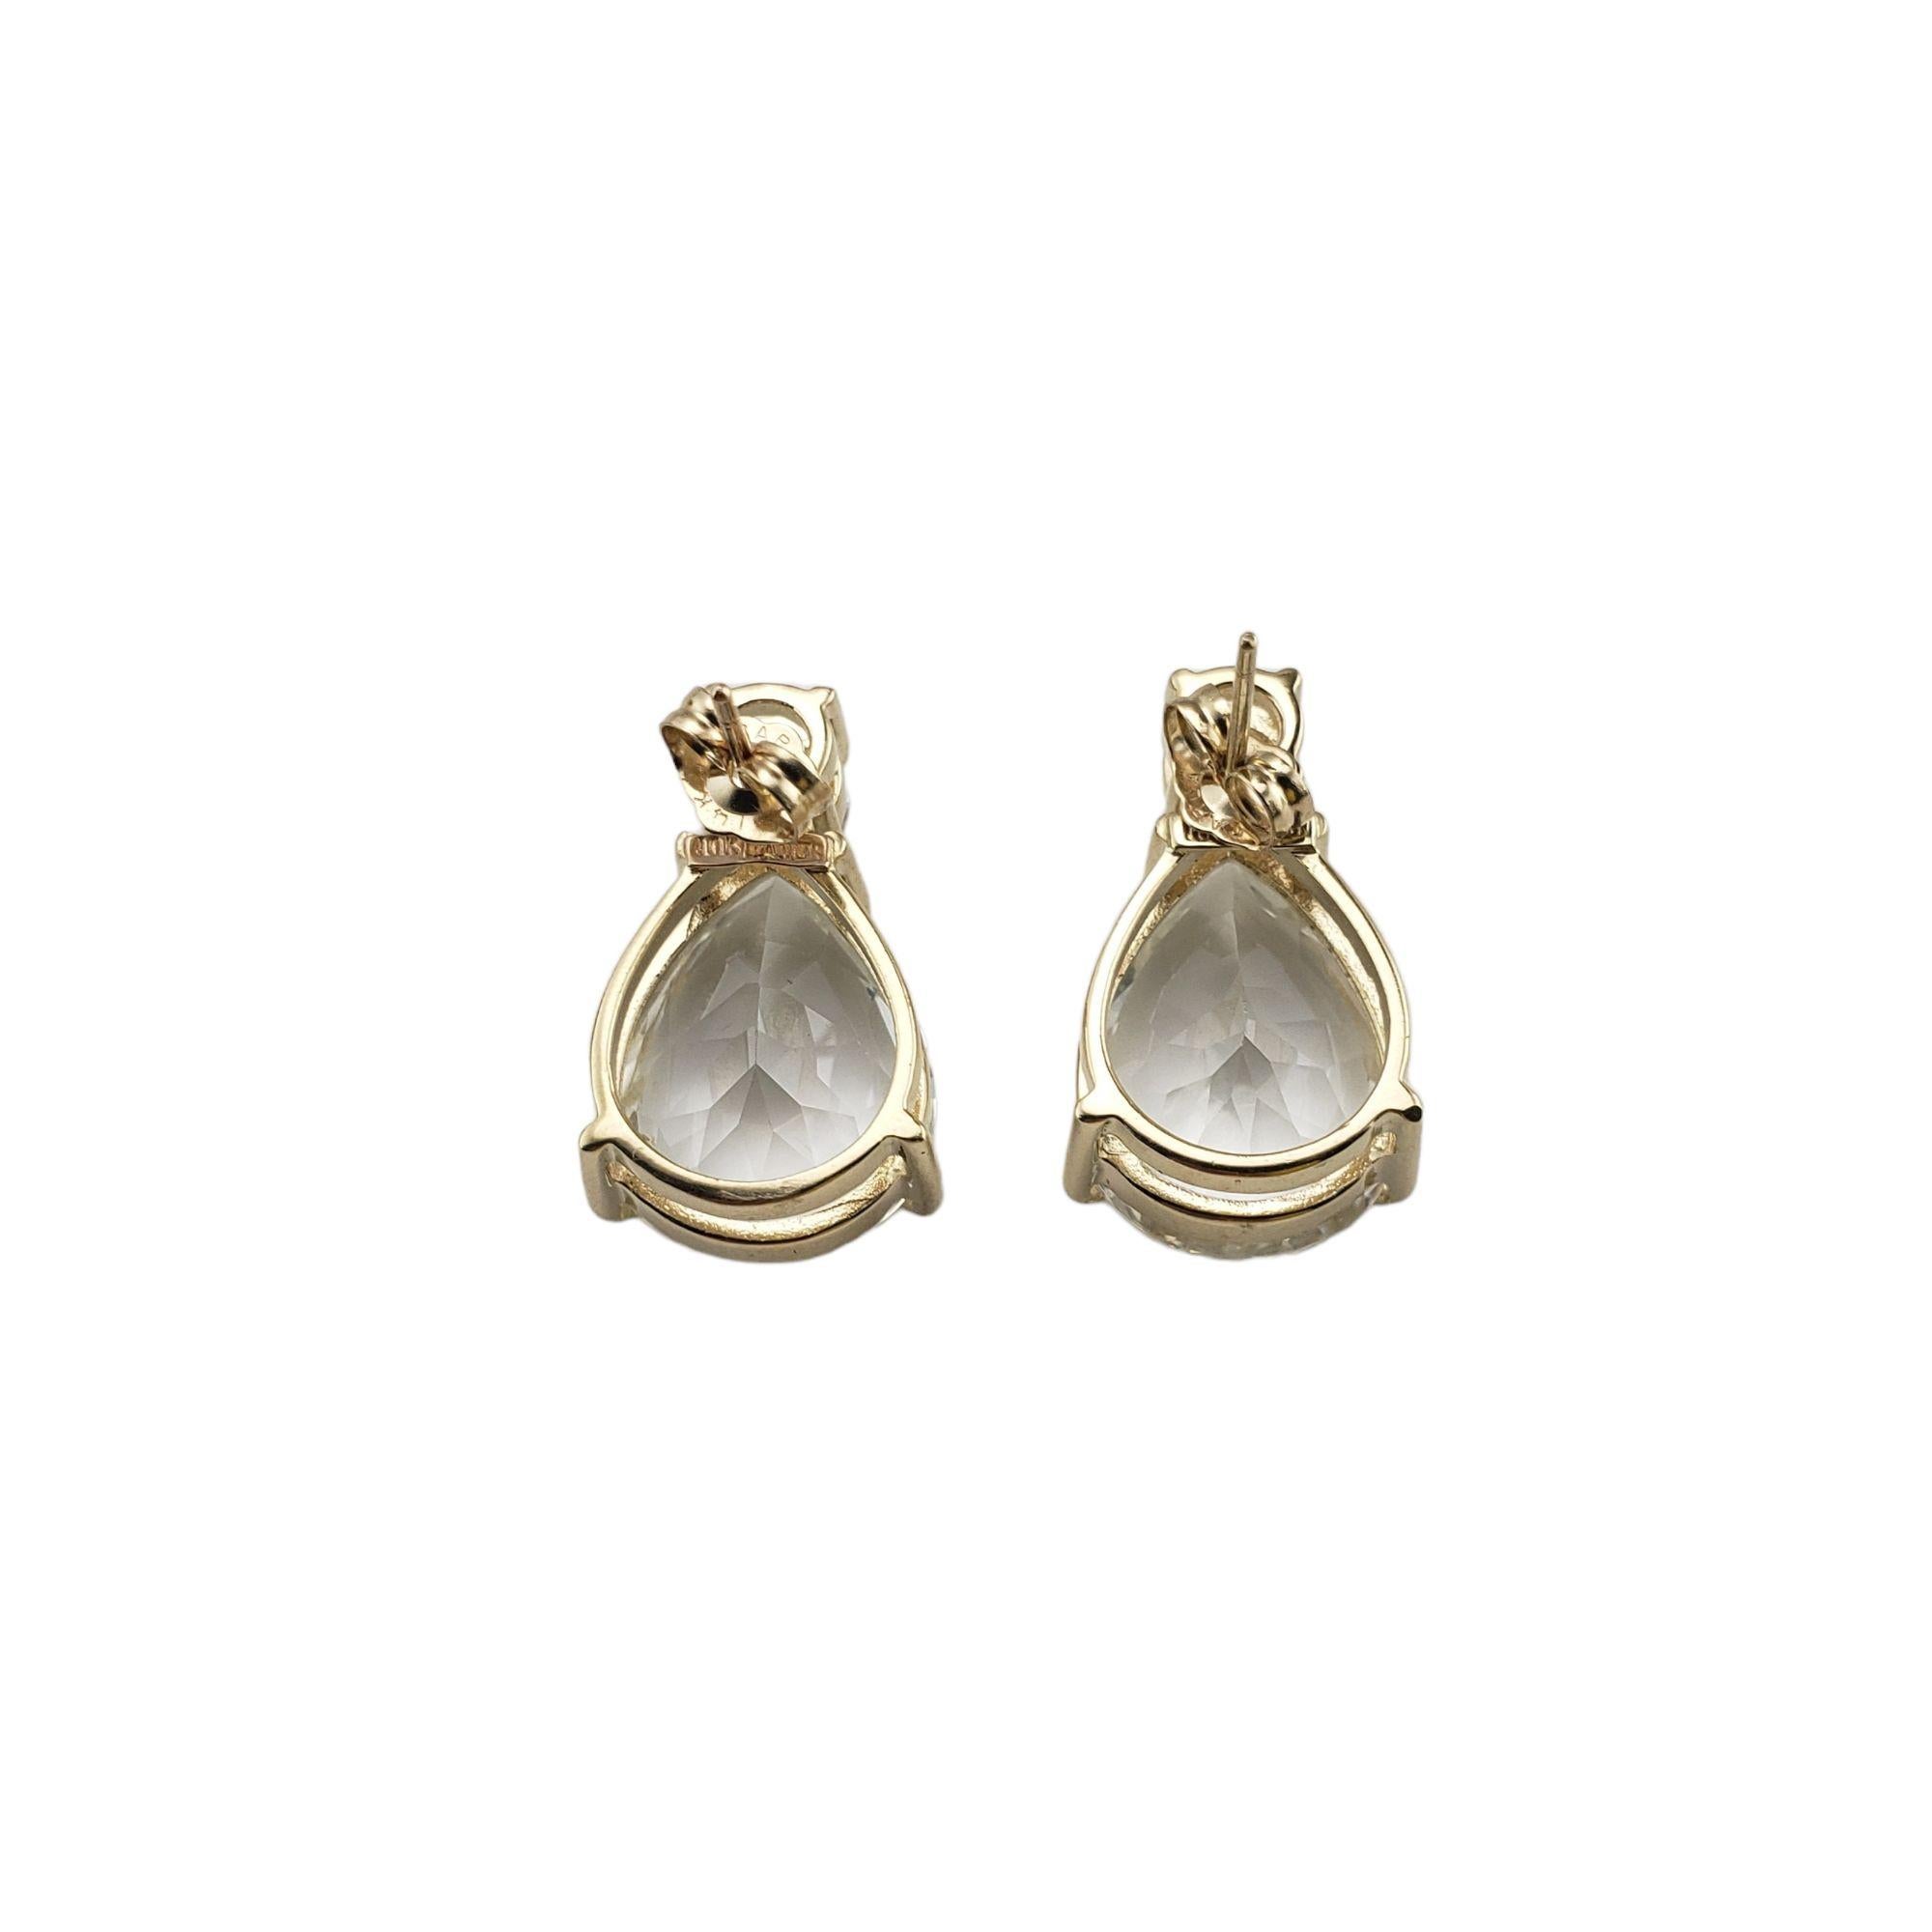 10 Karat Yellow Gold and White Topaz Earrings #13338 For Sale 2